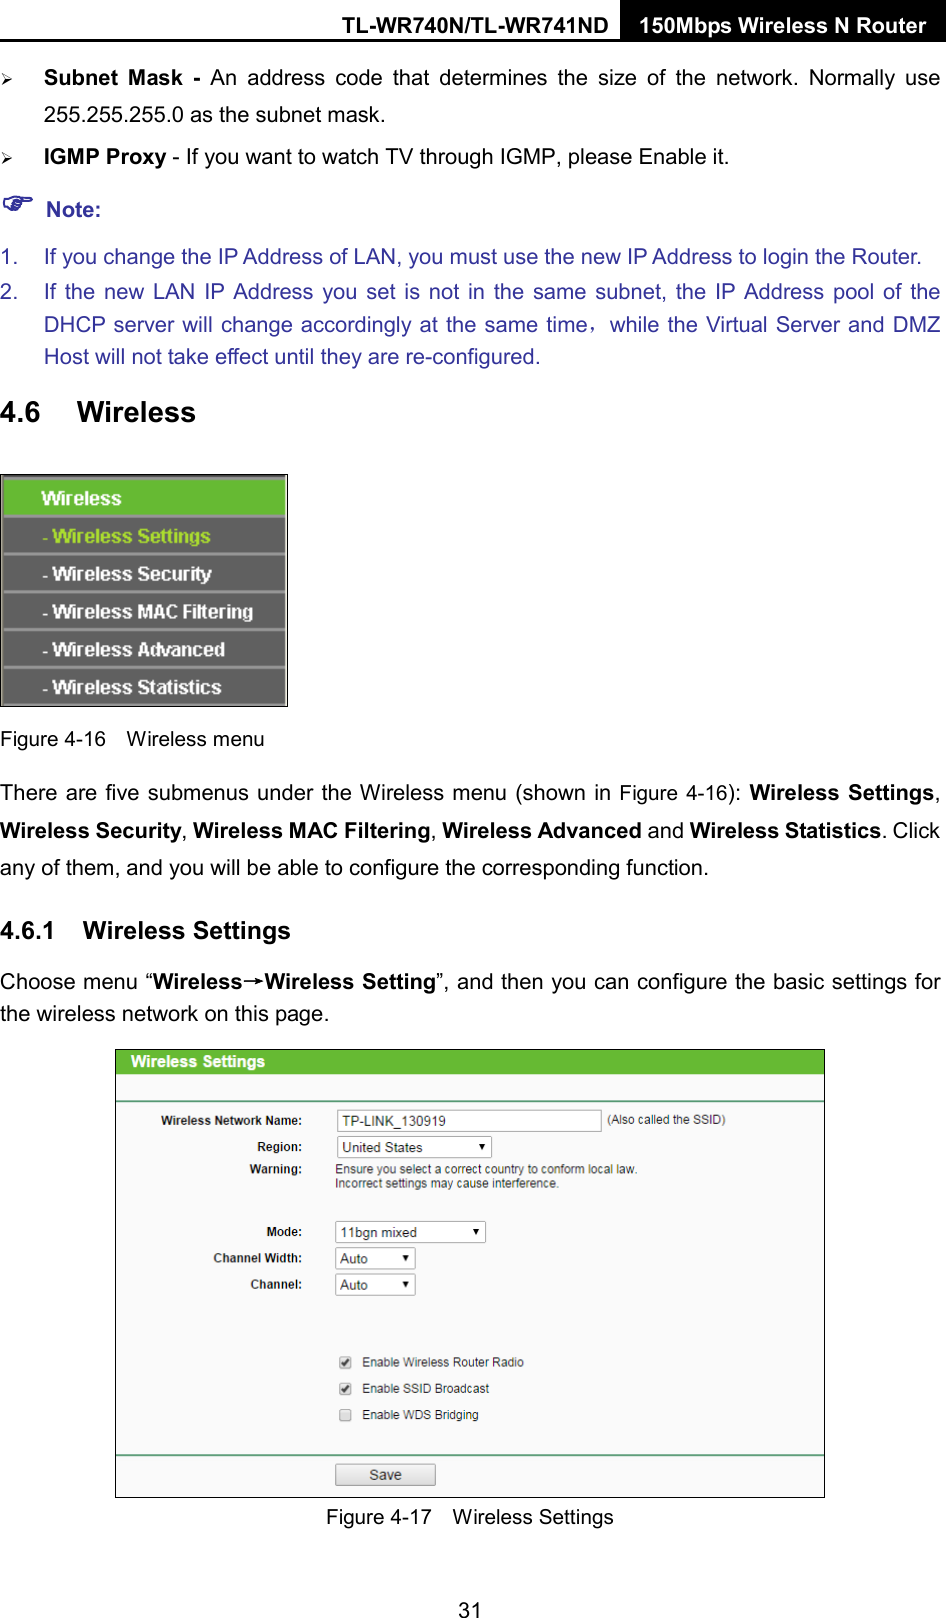 TL-WR740N/TL-WR741ND 150Mbps Wireless N Router   Subnet Mask - An address code that determines the size of the network. Normally use 255.255.255.0 as the subnet mask.    IGMP Proxy - If you want to watch TV through IGMP, please Enable it.  Note: 1. If you change the IP Address of LAN, you must use the new IP Address to login the Router.   2. If the new LAN IP Address you set is not in the same subnet, the IP Address pool of the DHCP server will change accordingly at the same time，while the Virtual Server and DMZ Host will not take effect until they are re-configured. 4.6 Wireless  Figure 4-16  Wireless menu There are five submenus under the Wireless menu (shown in Figure 4-16): Wireless Settings, Wireless Security, Wireless MAC Filtering, Wireless Advanced and Wireless Statistics. Click any of them, and you will be able to configure the corresponding function.   4.6.1 Wireless Settings Choose menu “Wireless→Wireless Setting”, and then you can configure the basic settings for the wireless network on this page.  Figure 4-17  Wireless Settings 31 